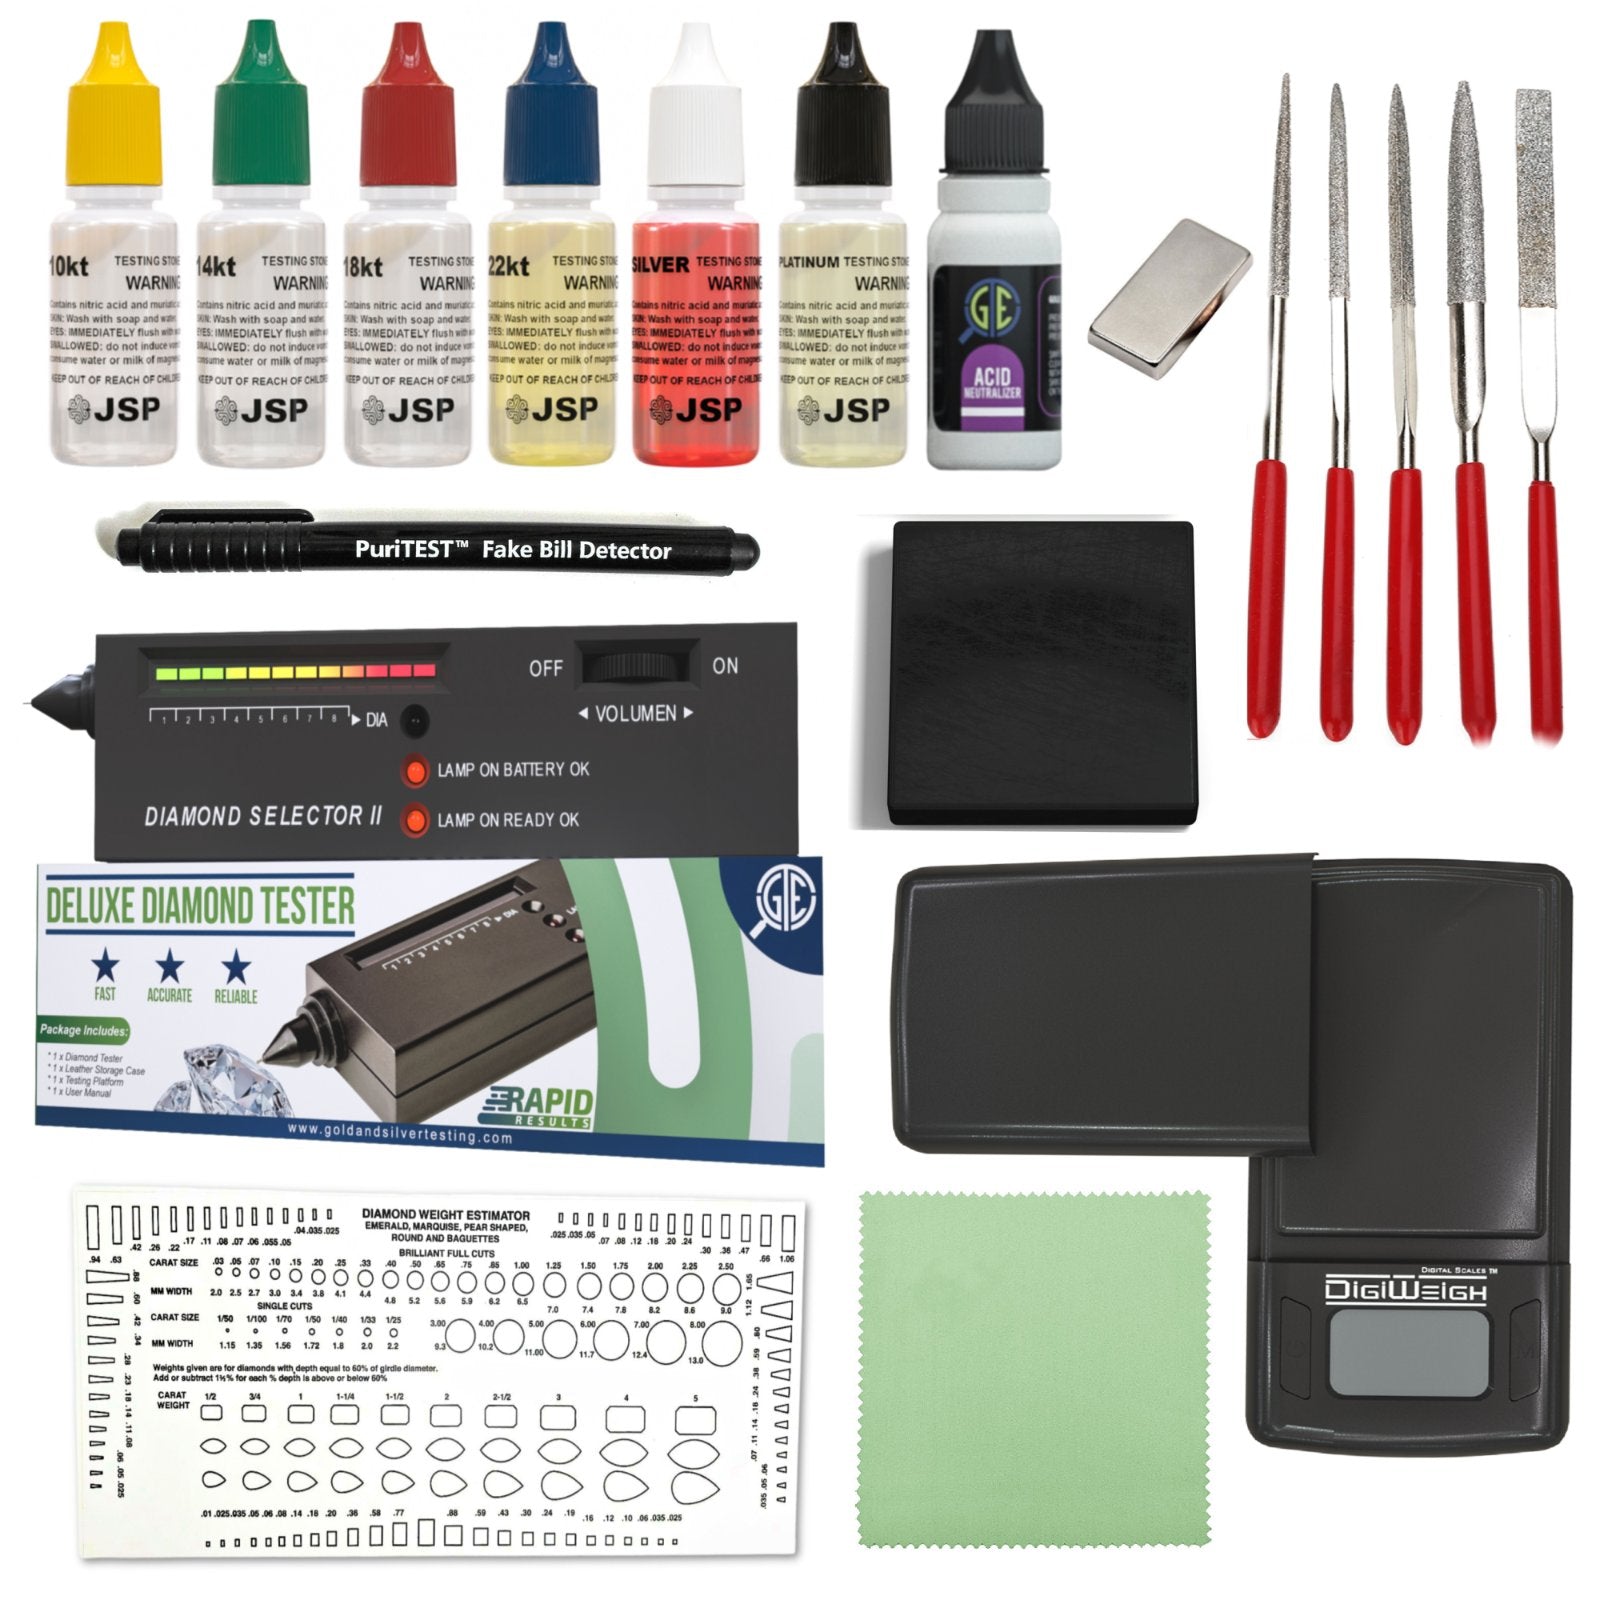 JSP Gold Silver and Platinum Jewelry Acid Appraisal Testing Kit Electr –  GOLD TESTING EQUIPMENT